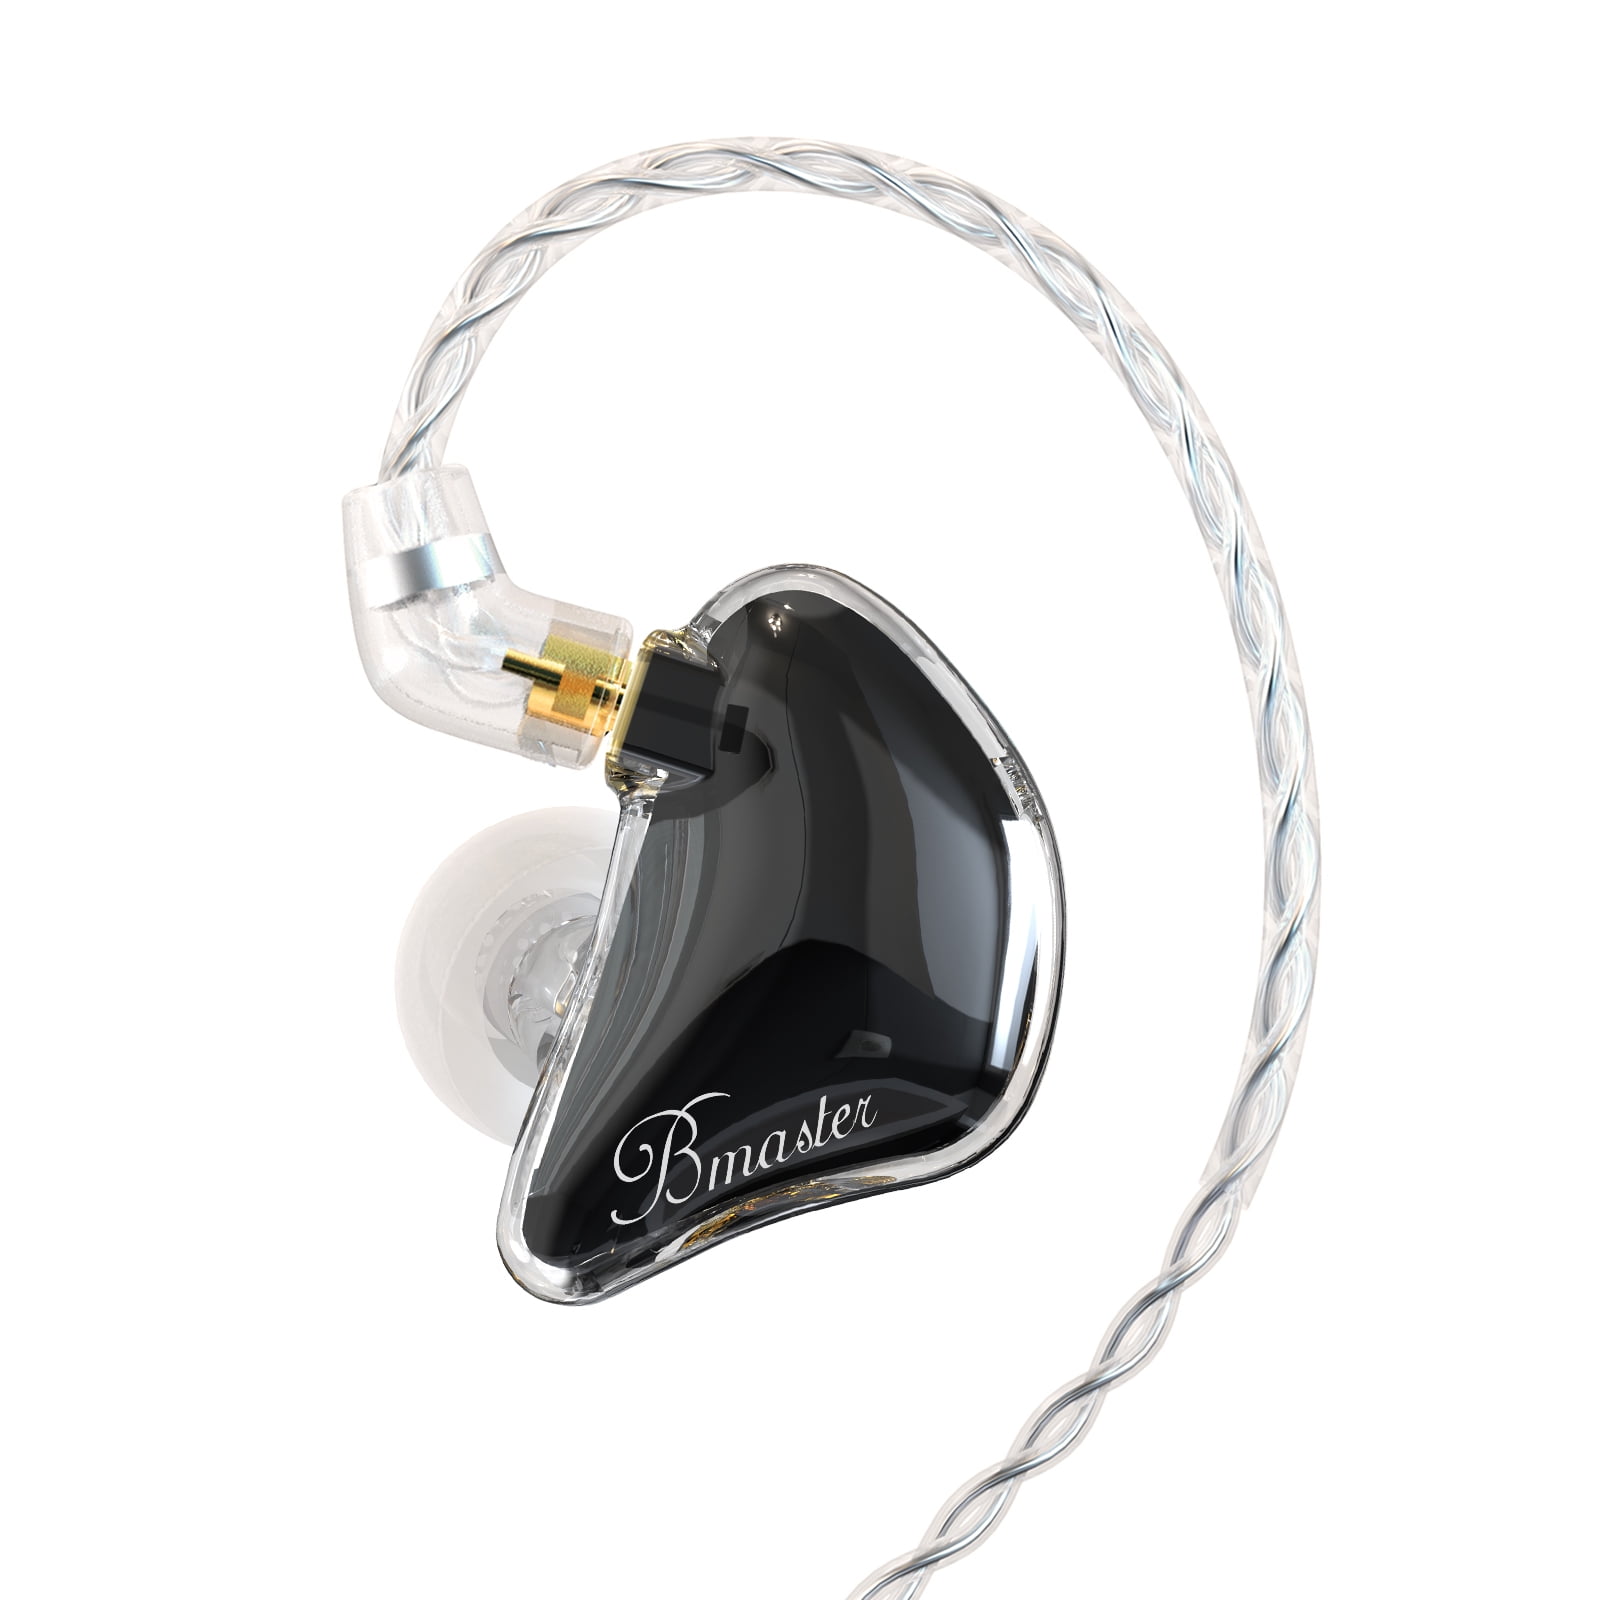 BASN Bmaster Triple Drivers in Ear Monitor Headphone with Two